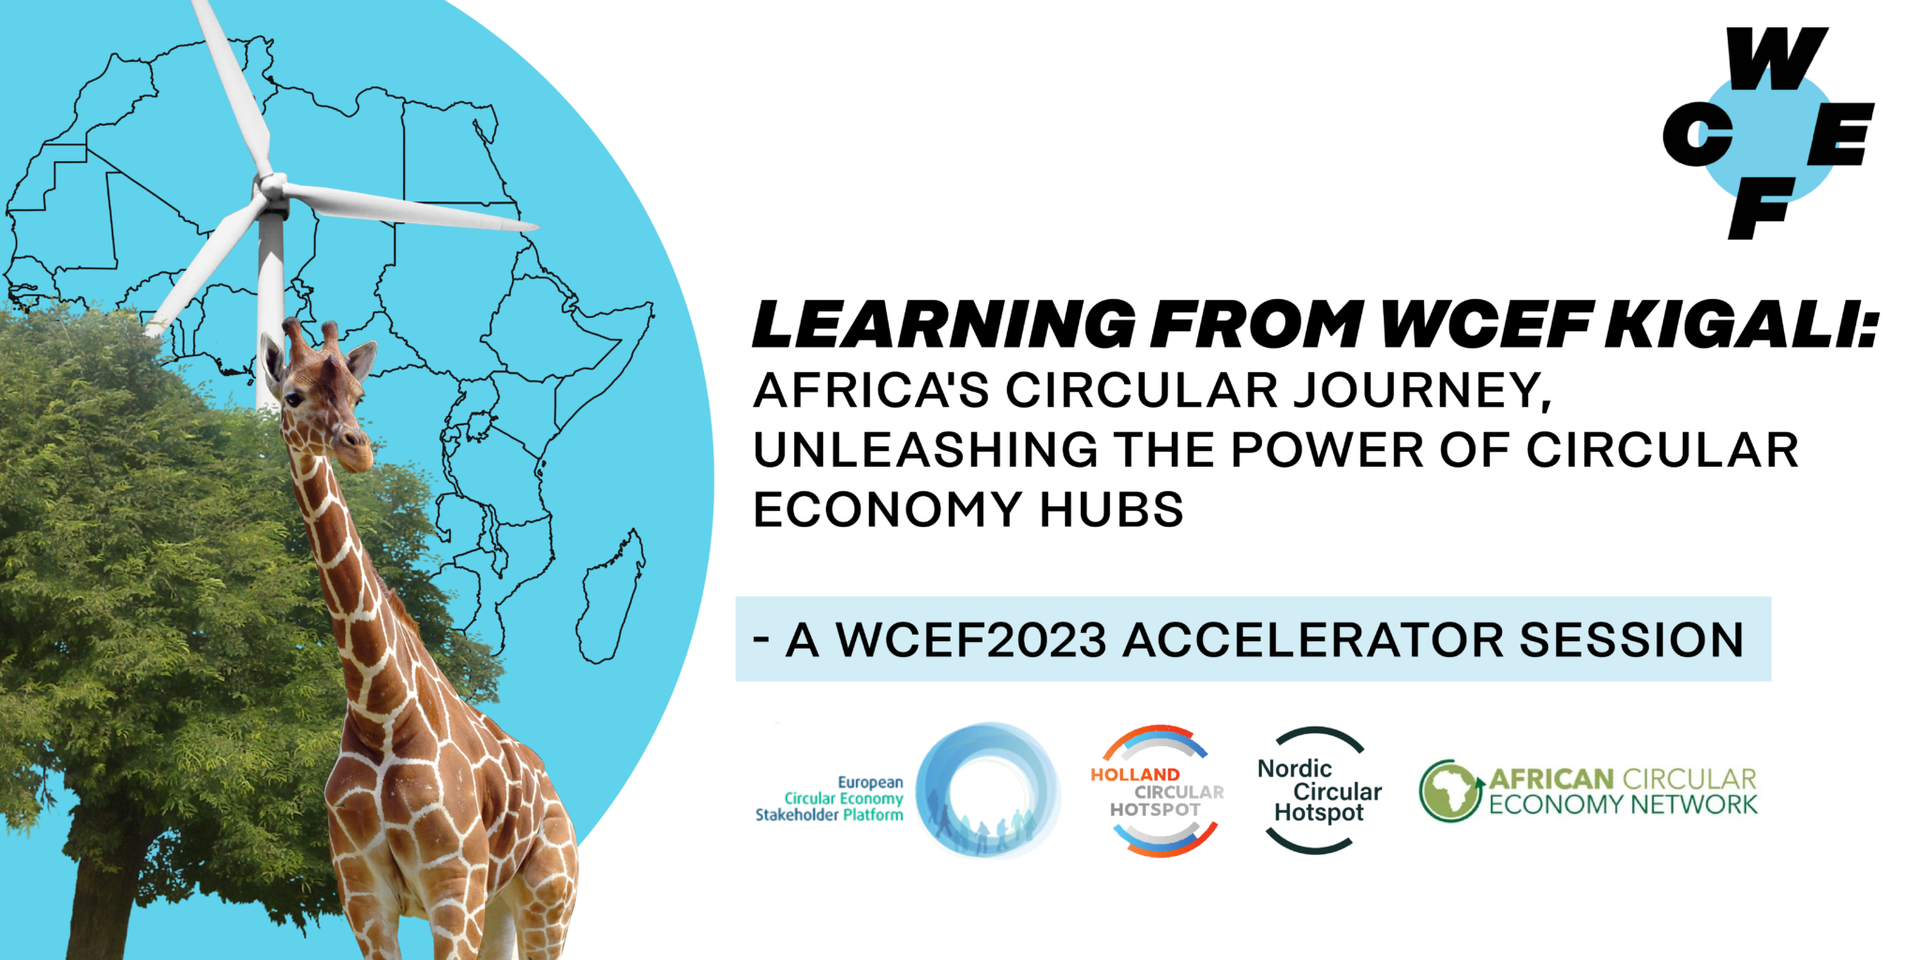 WCEF2023 Accelerator Session  Africa’s circular journey: Unleashing the power of Circular Economy Hubs - WCEF2023 - hoster by ACEN